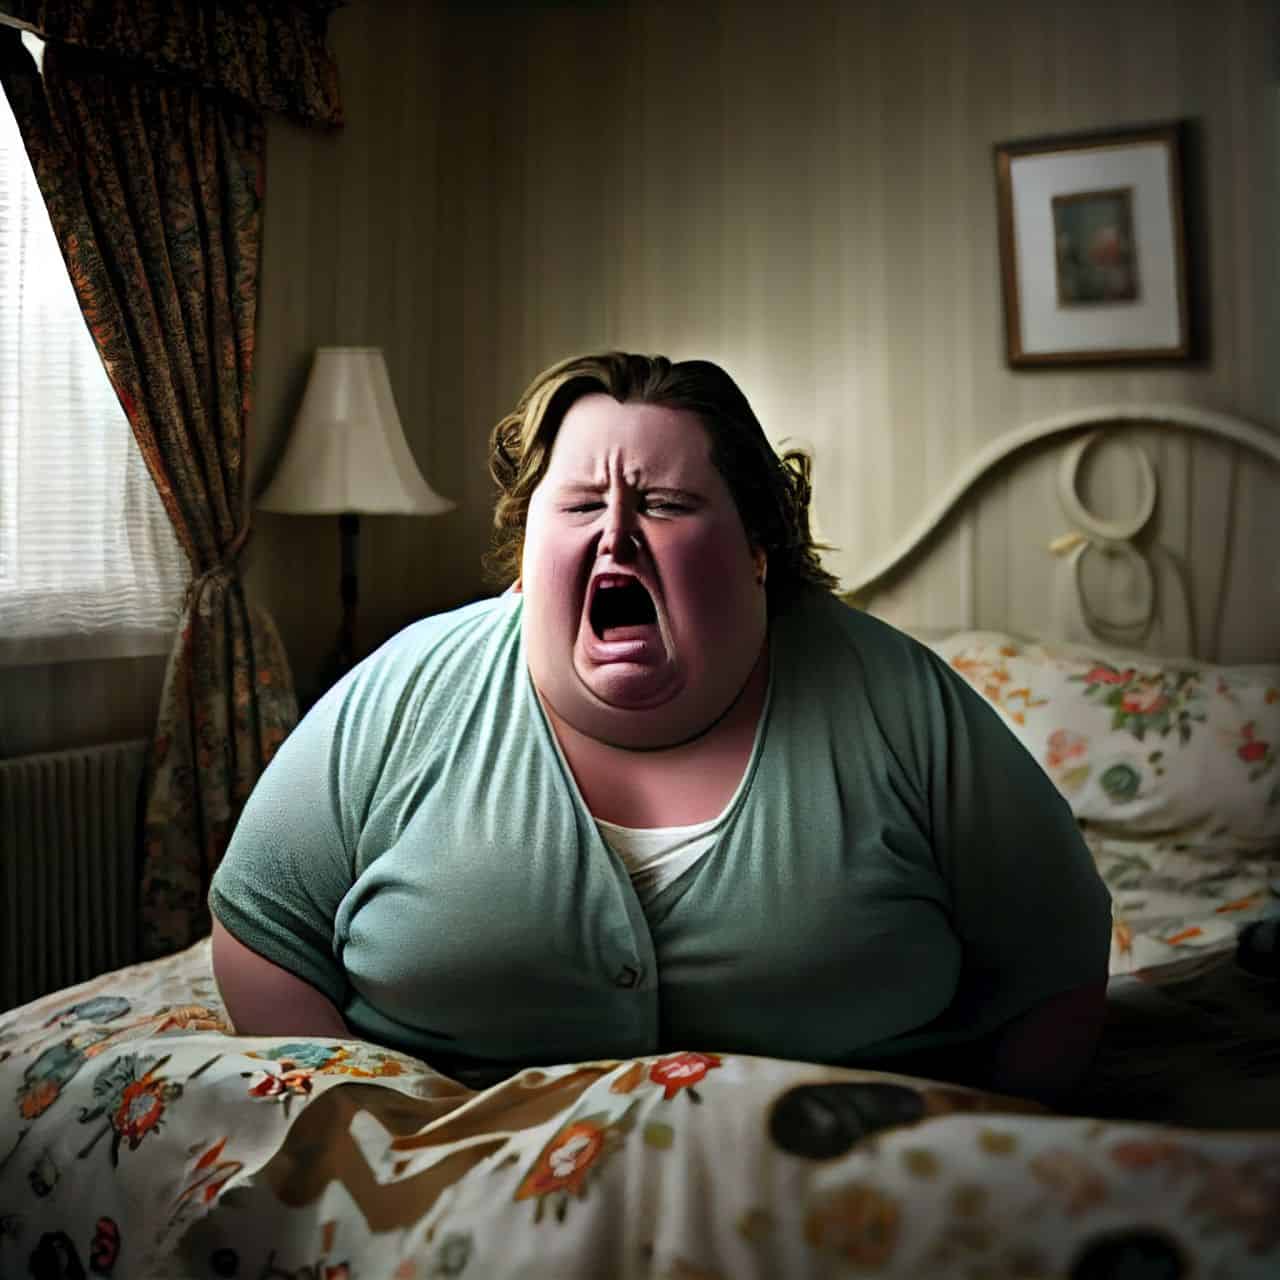 obese woman on the bed